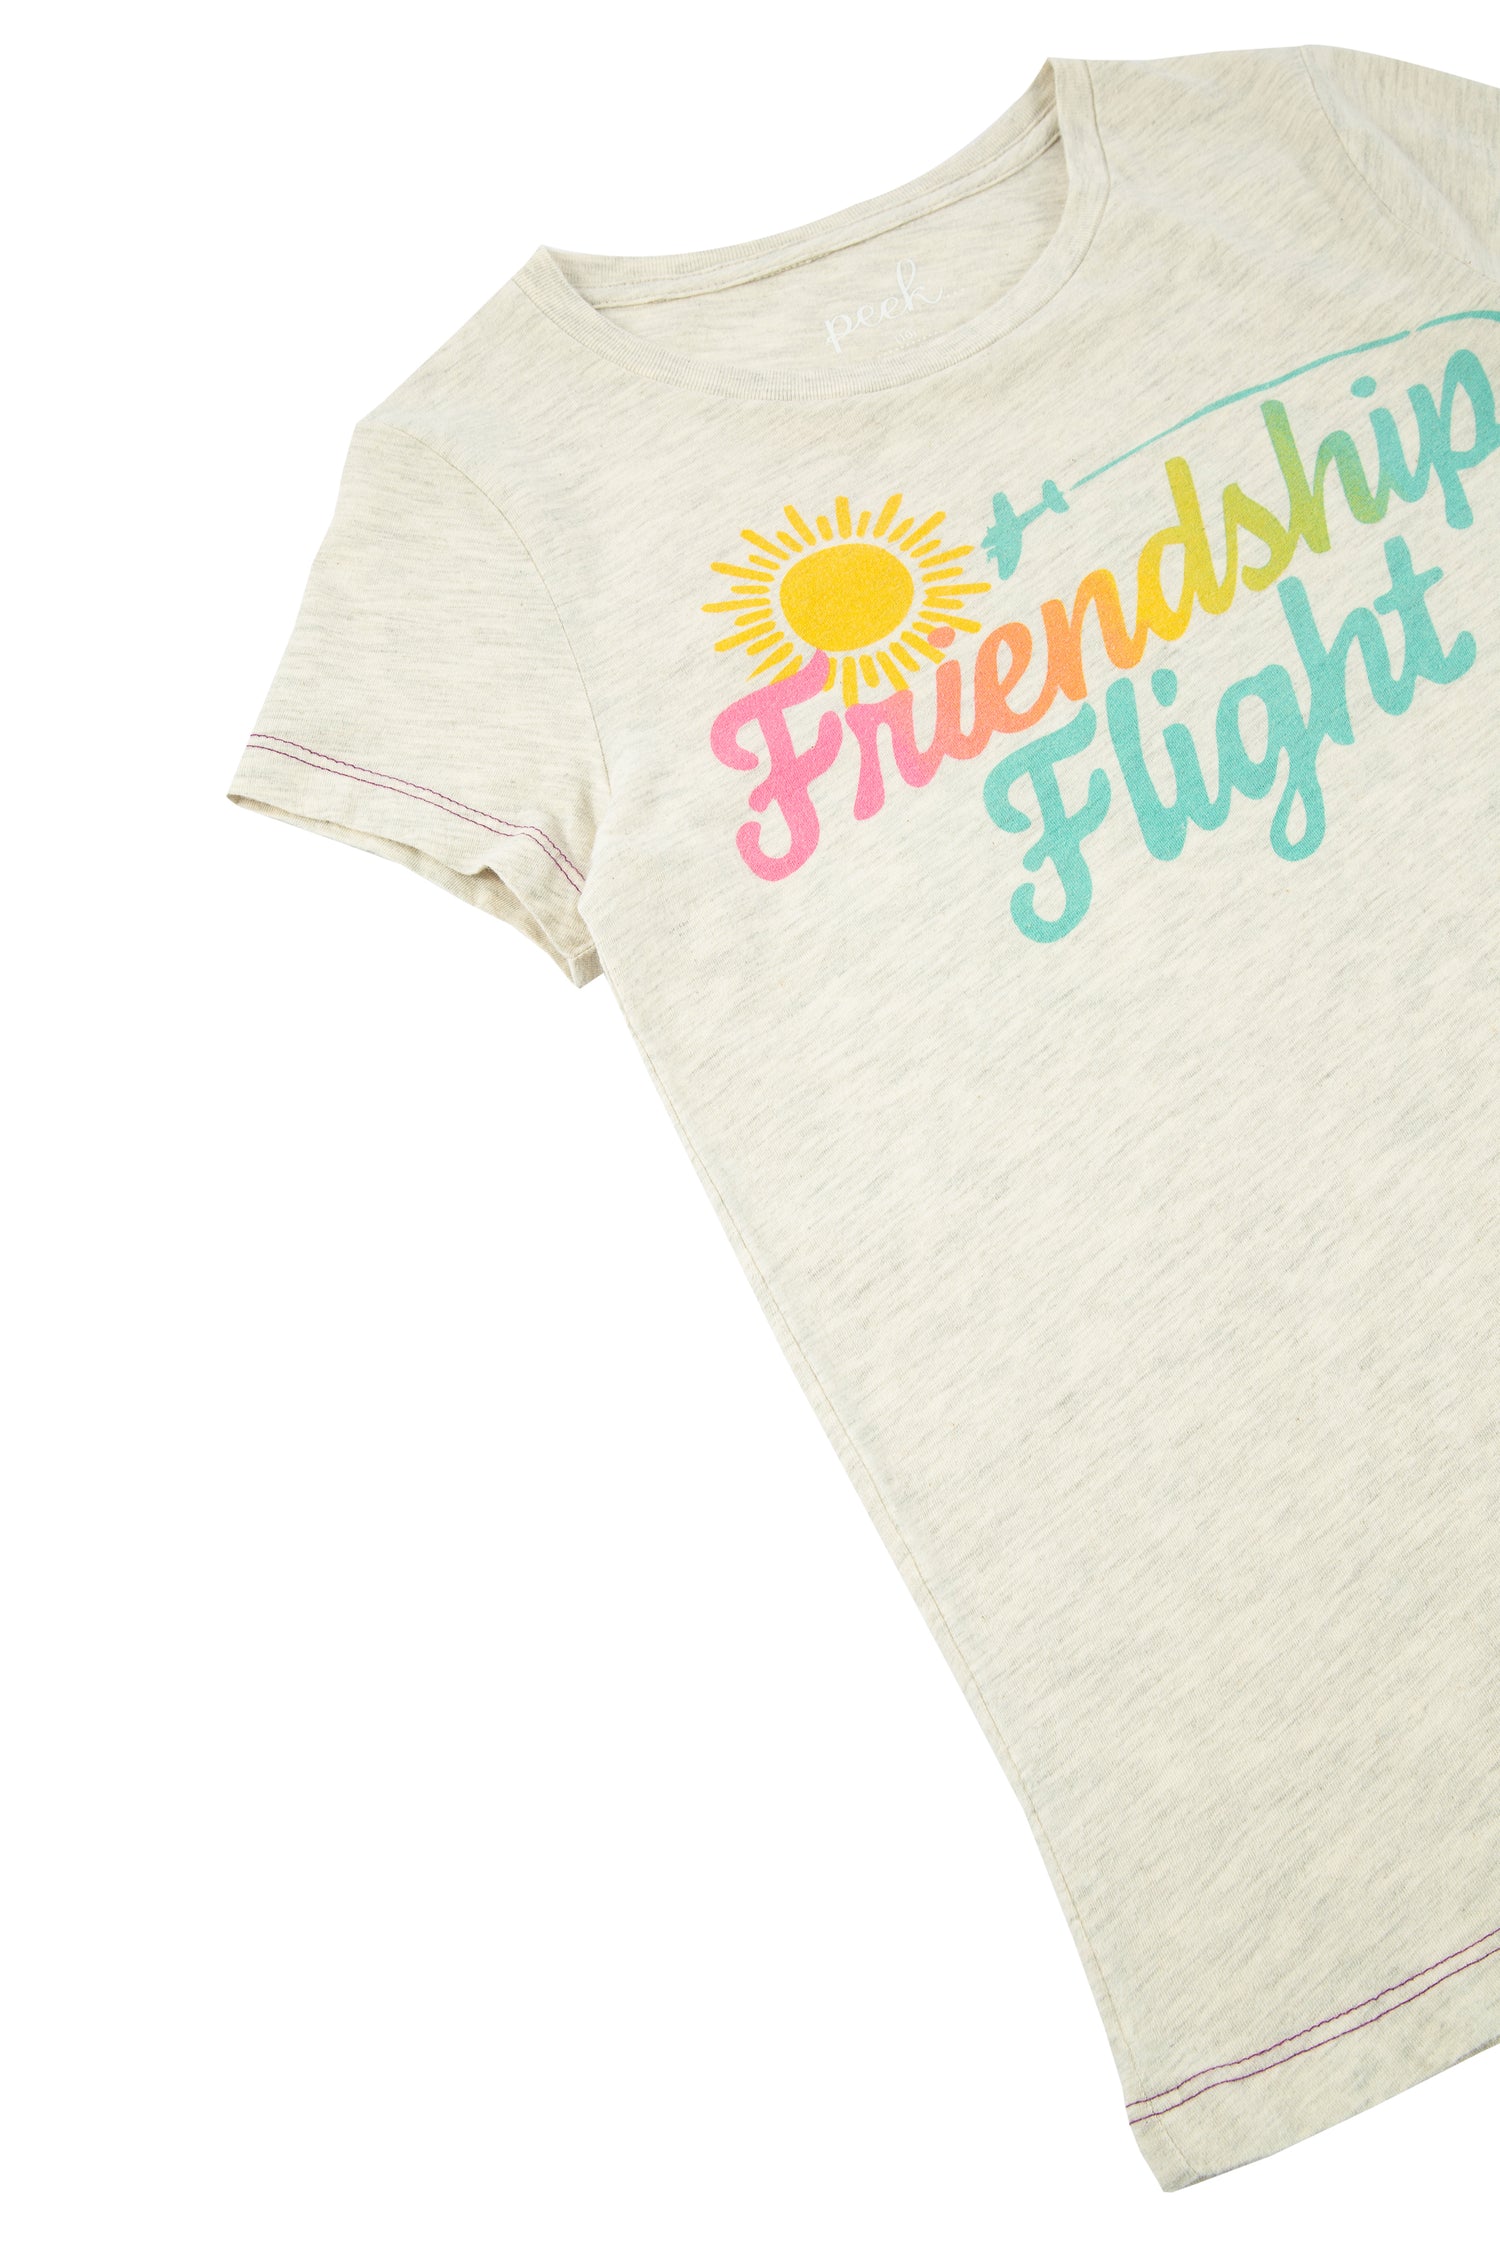 Close up of gray t-shirt with illustrated sun and multi-colored 'friendship flight' text